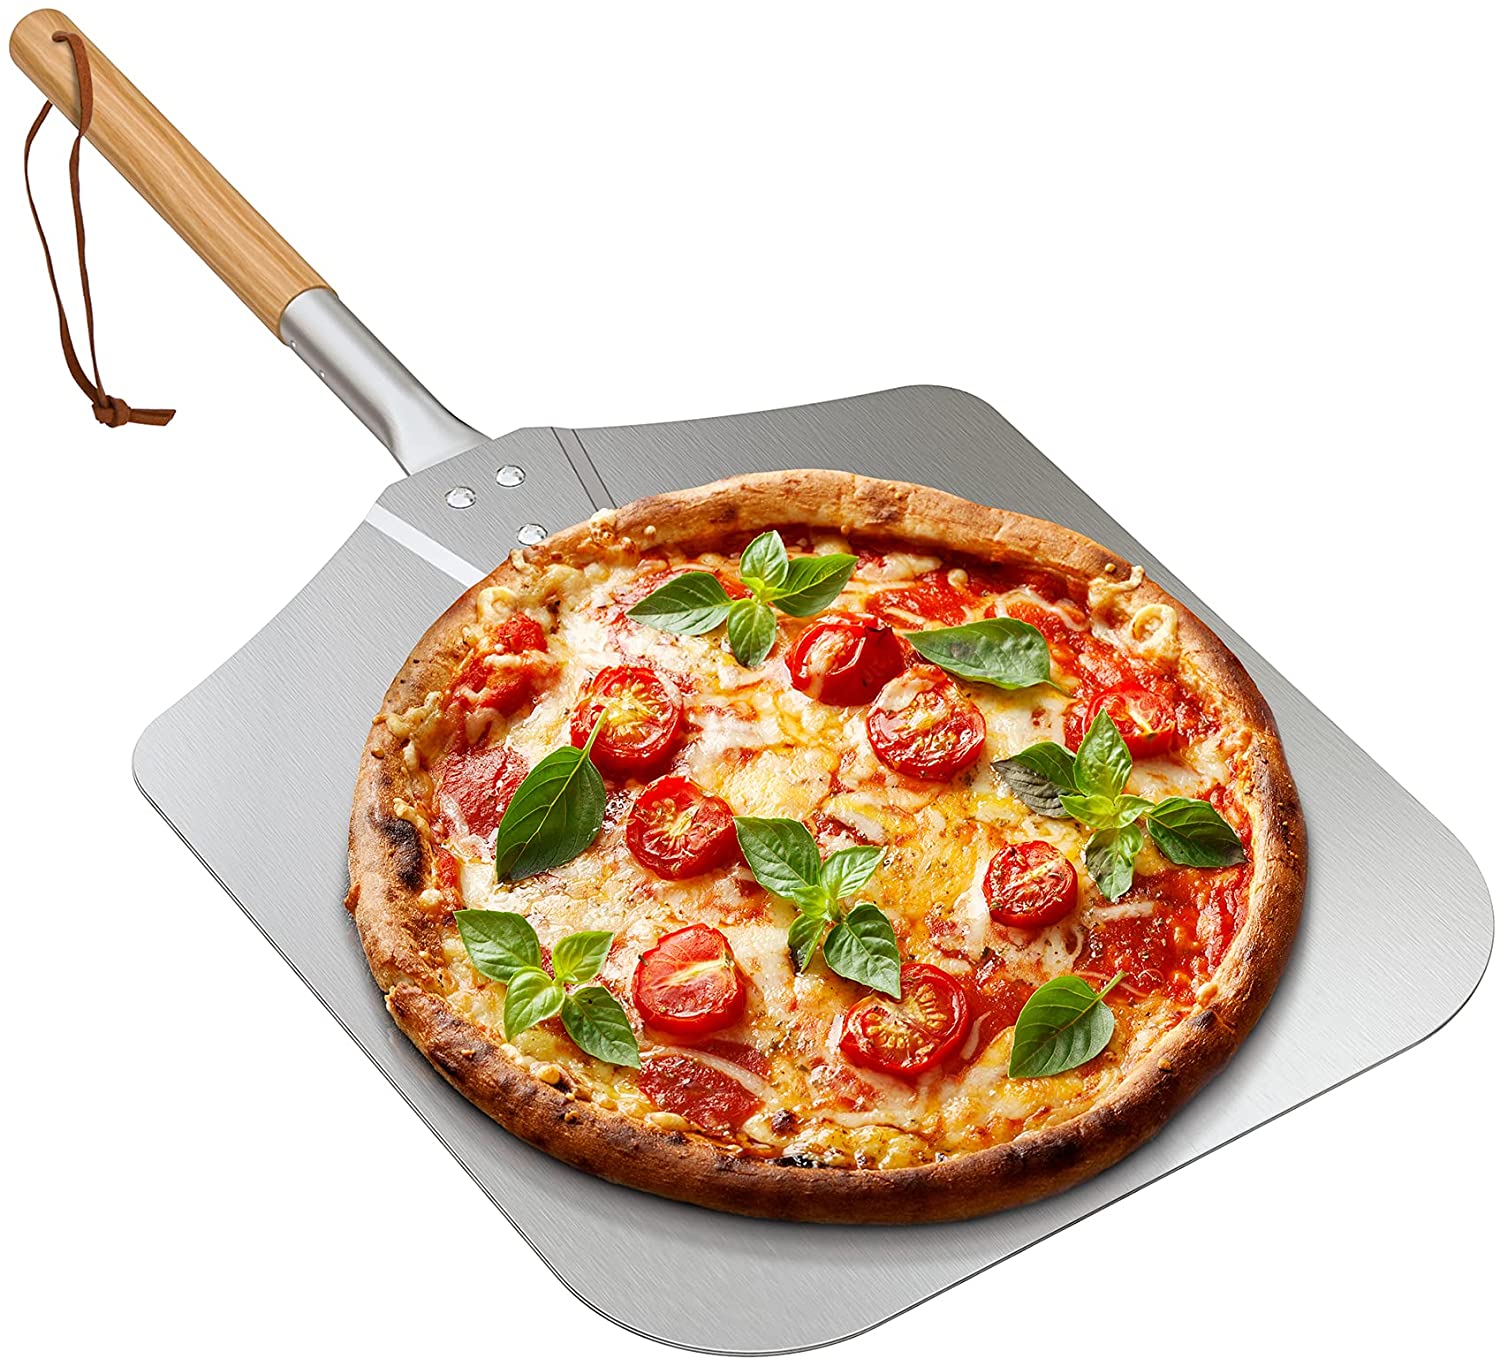 Onlyfire Large Aluminum Pizza Peel, with Wooden Handle, 13.5" x 16" for Baking Handmade Pizza, 28" Overall, for Any Outdoor Or Indoor Pizza Grill Oven. - e4cents